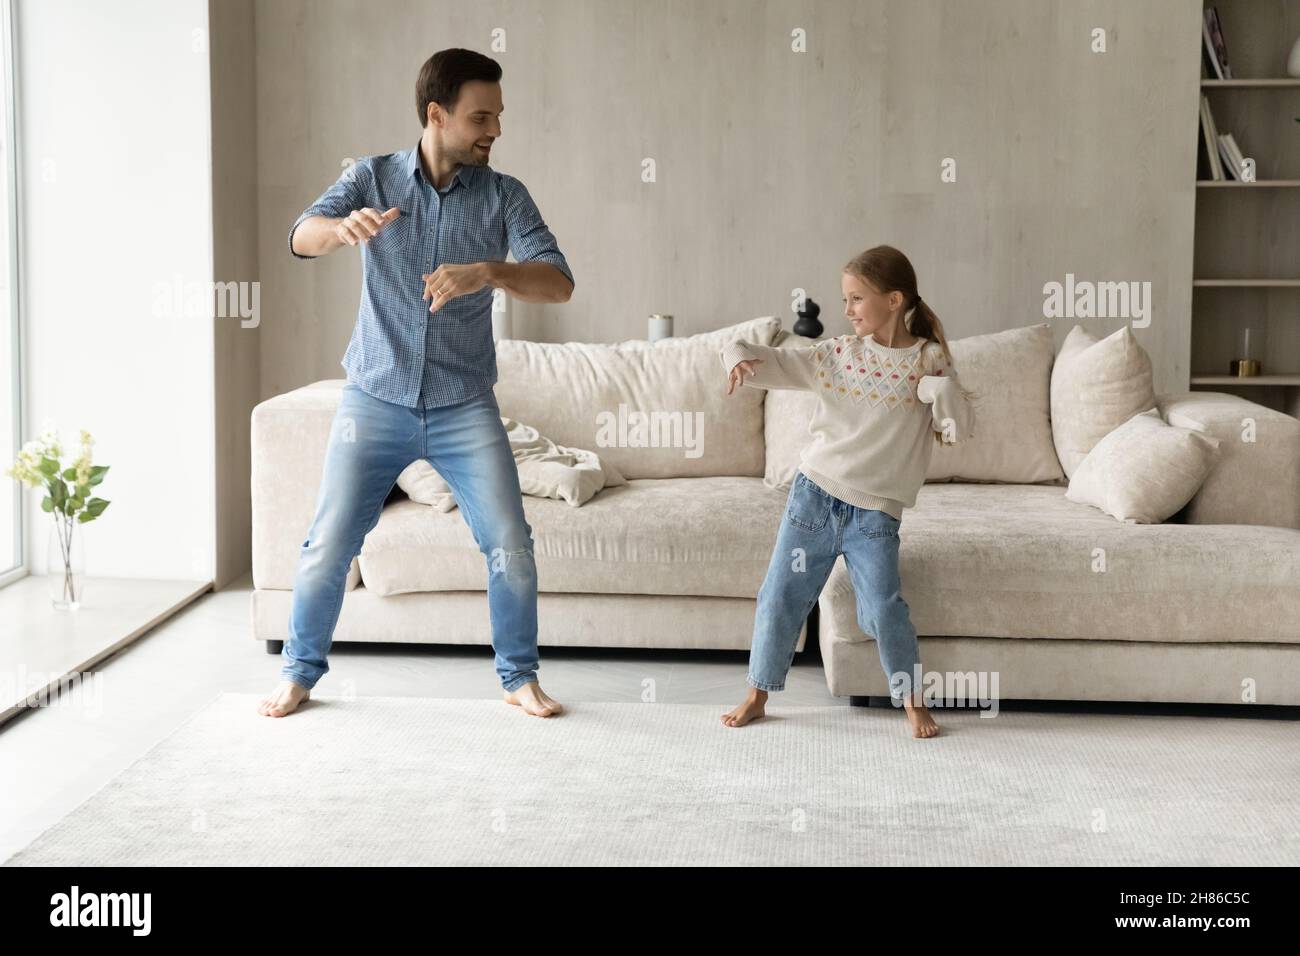 Caring happy young father dancing with adorable little daughter. Stock Photo